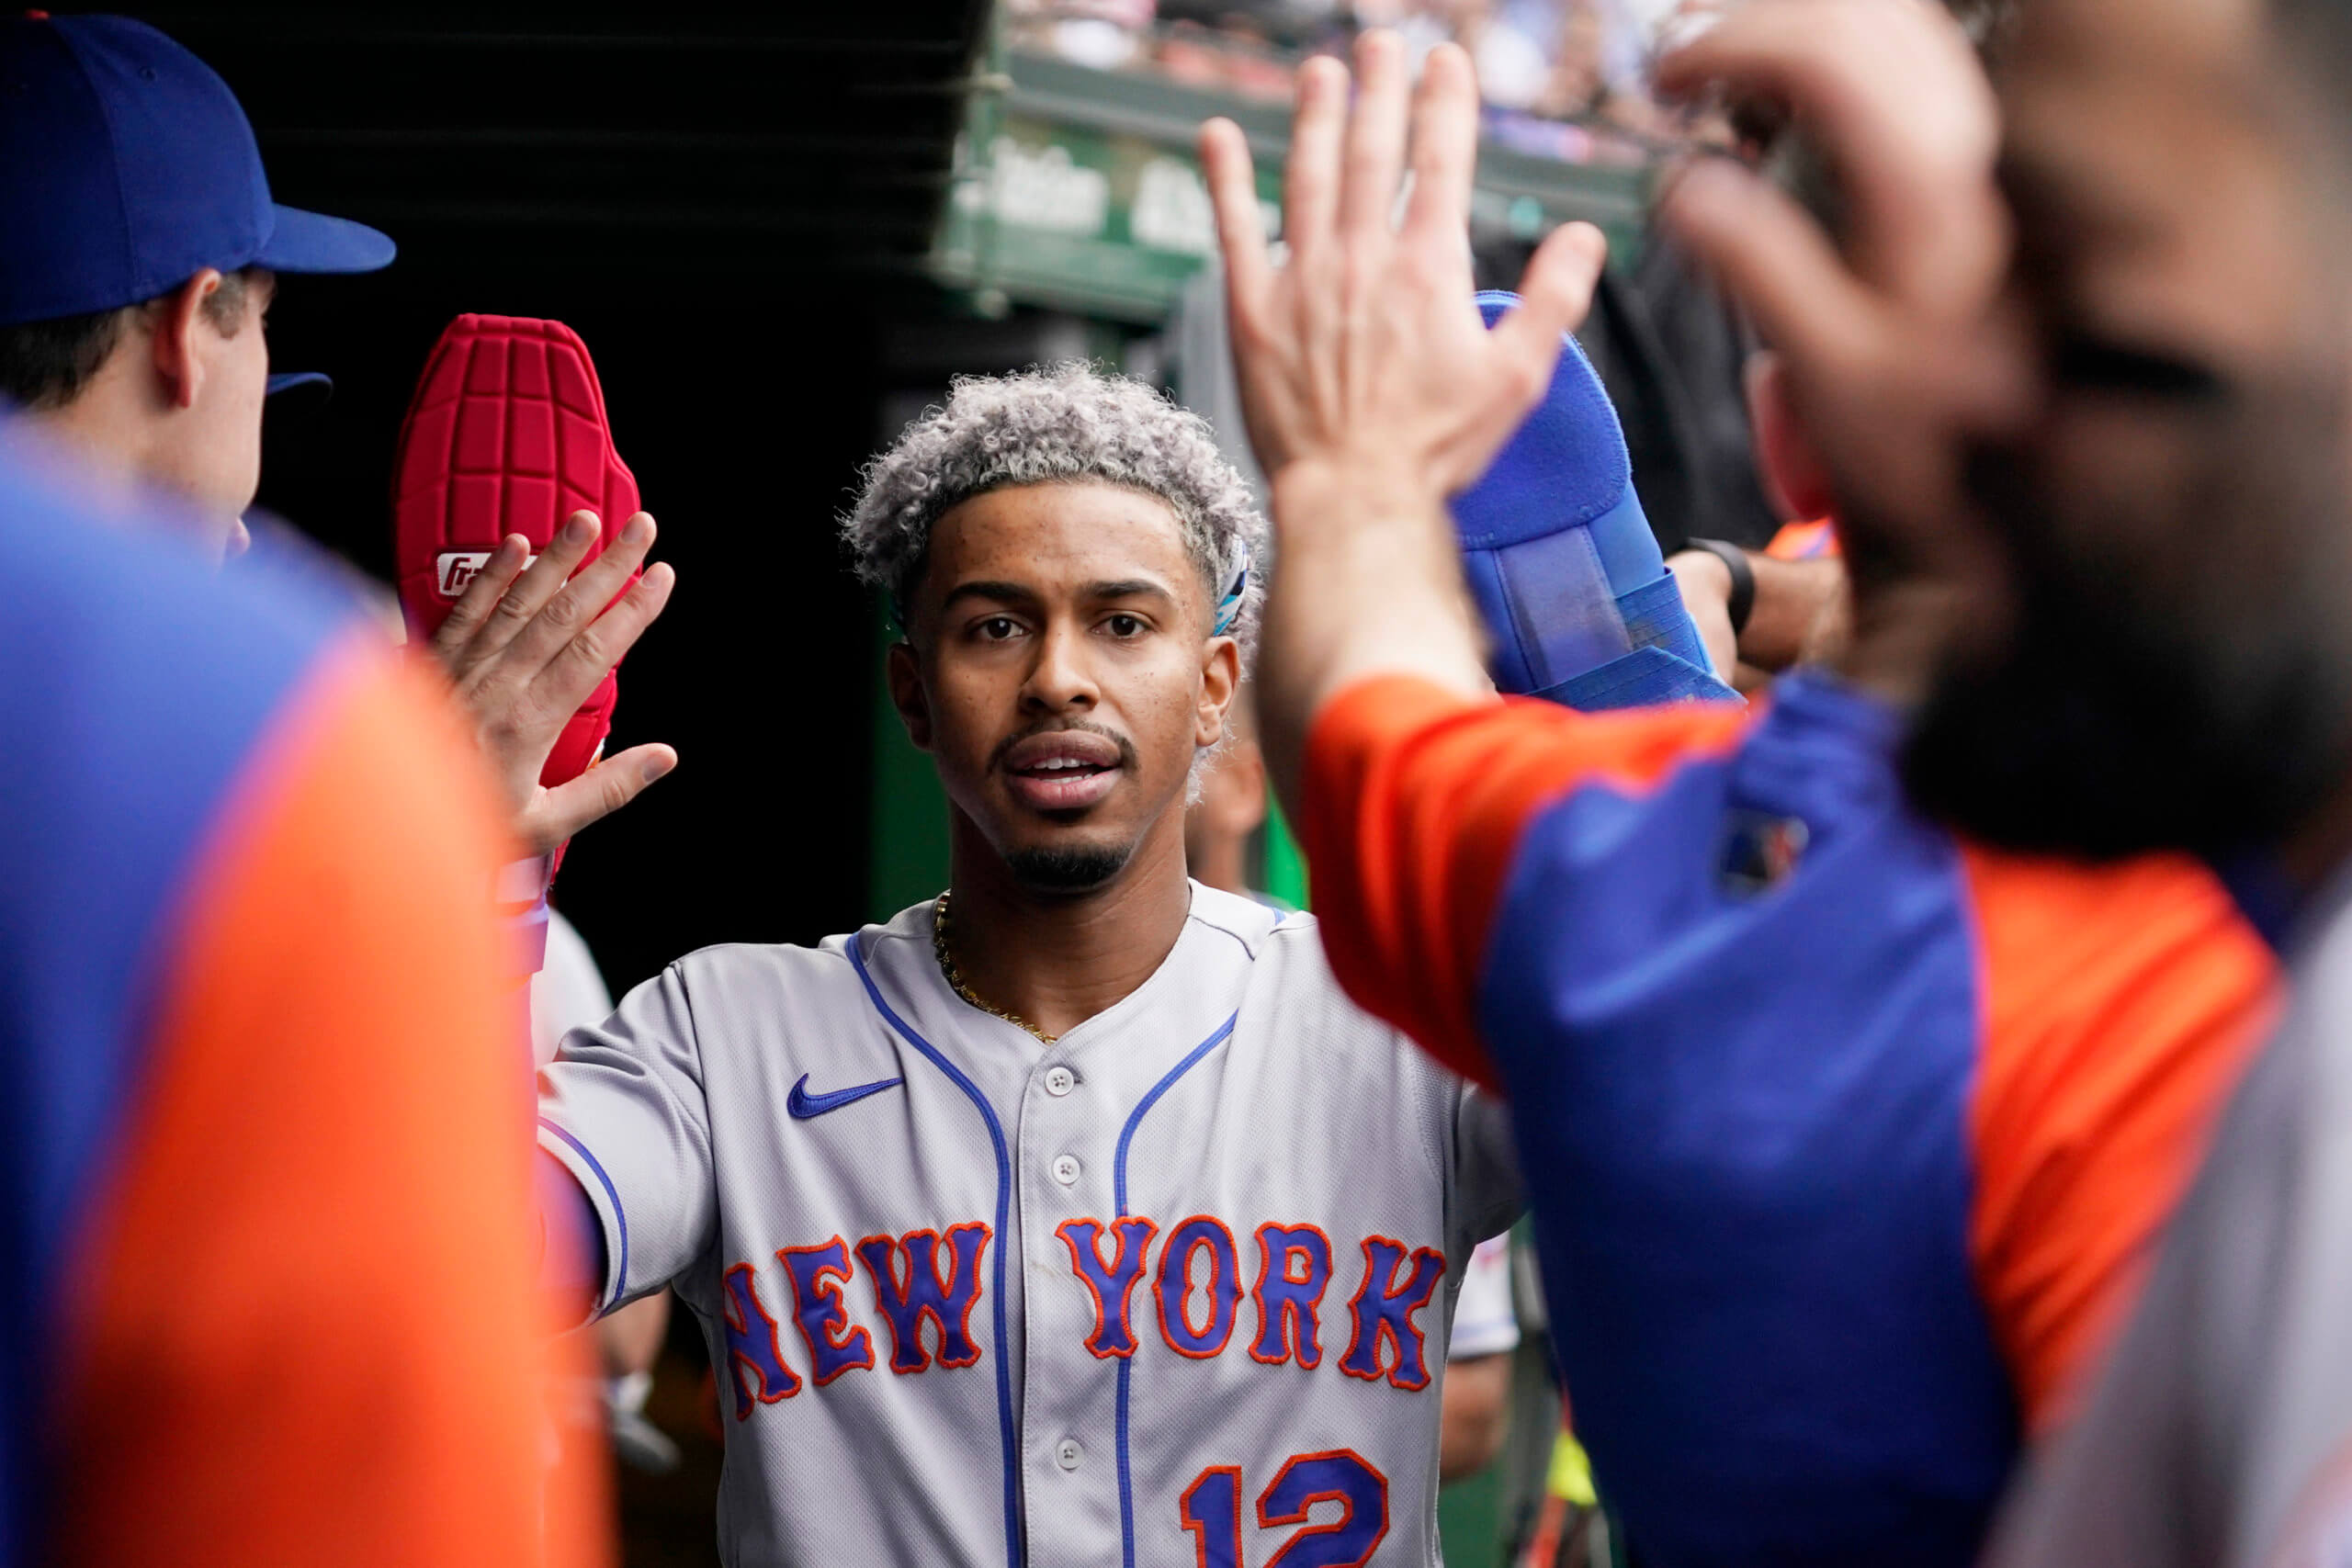 Falling short of super expectations? Jets have case study in Mets